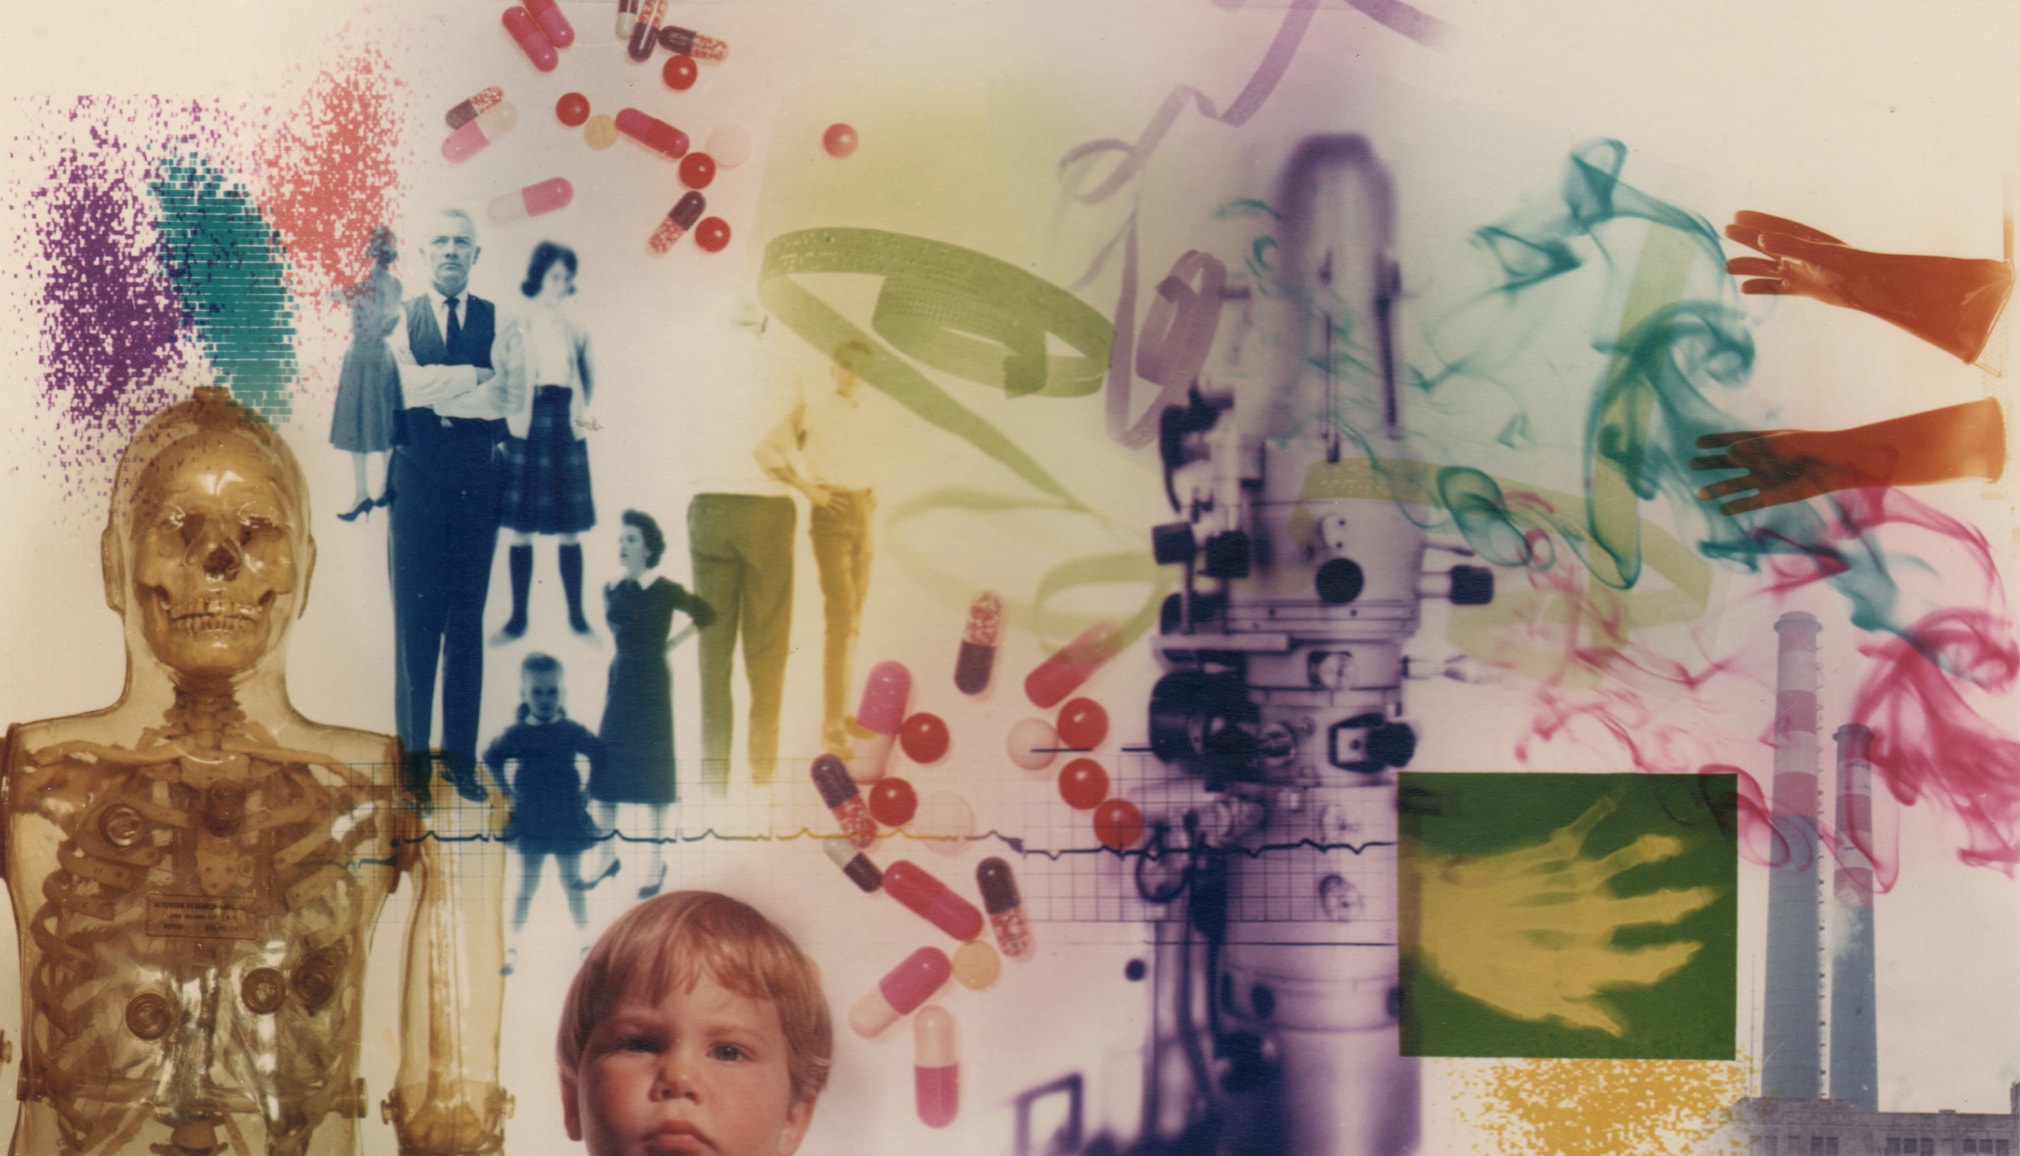 22. David Attie, Untitled (Pharmaceutical Montage), ​c. 1970. Composite color photo featuring a model skeleton, various pills, adults and children, wisps of smoke, gloves, and more.